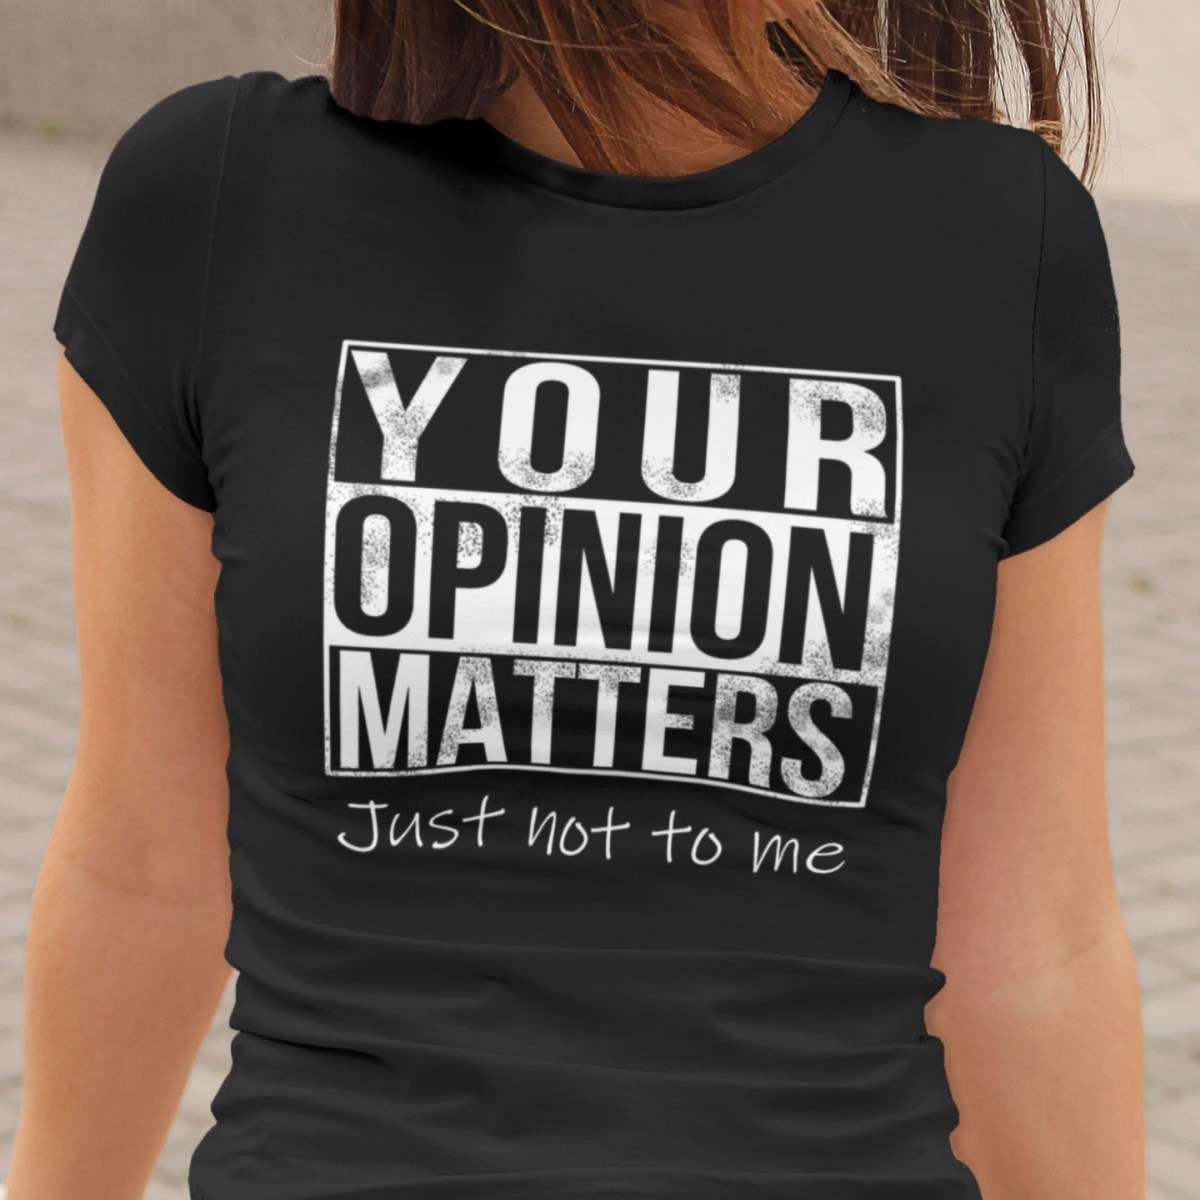 Your opinion matters just not to me